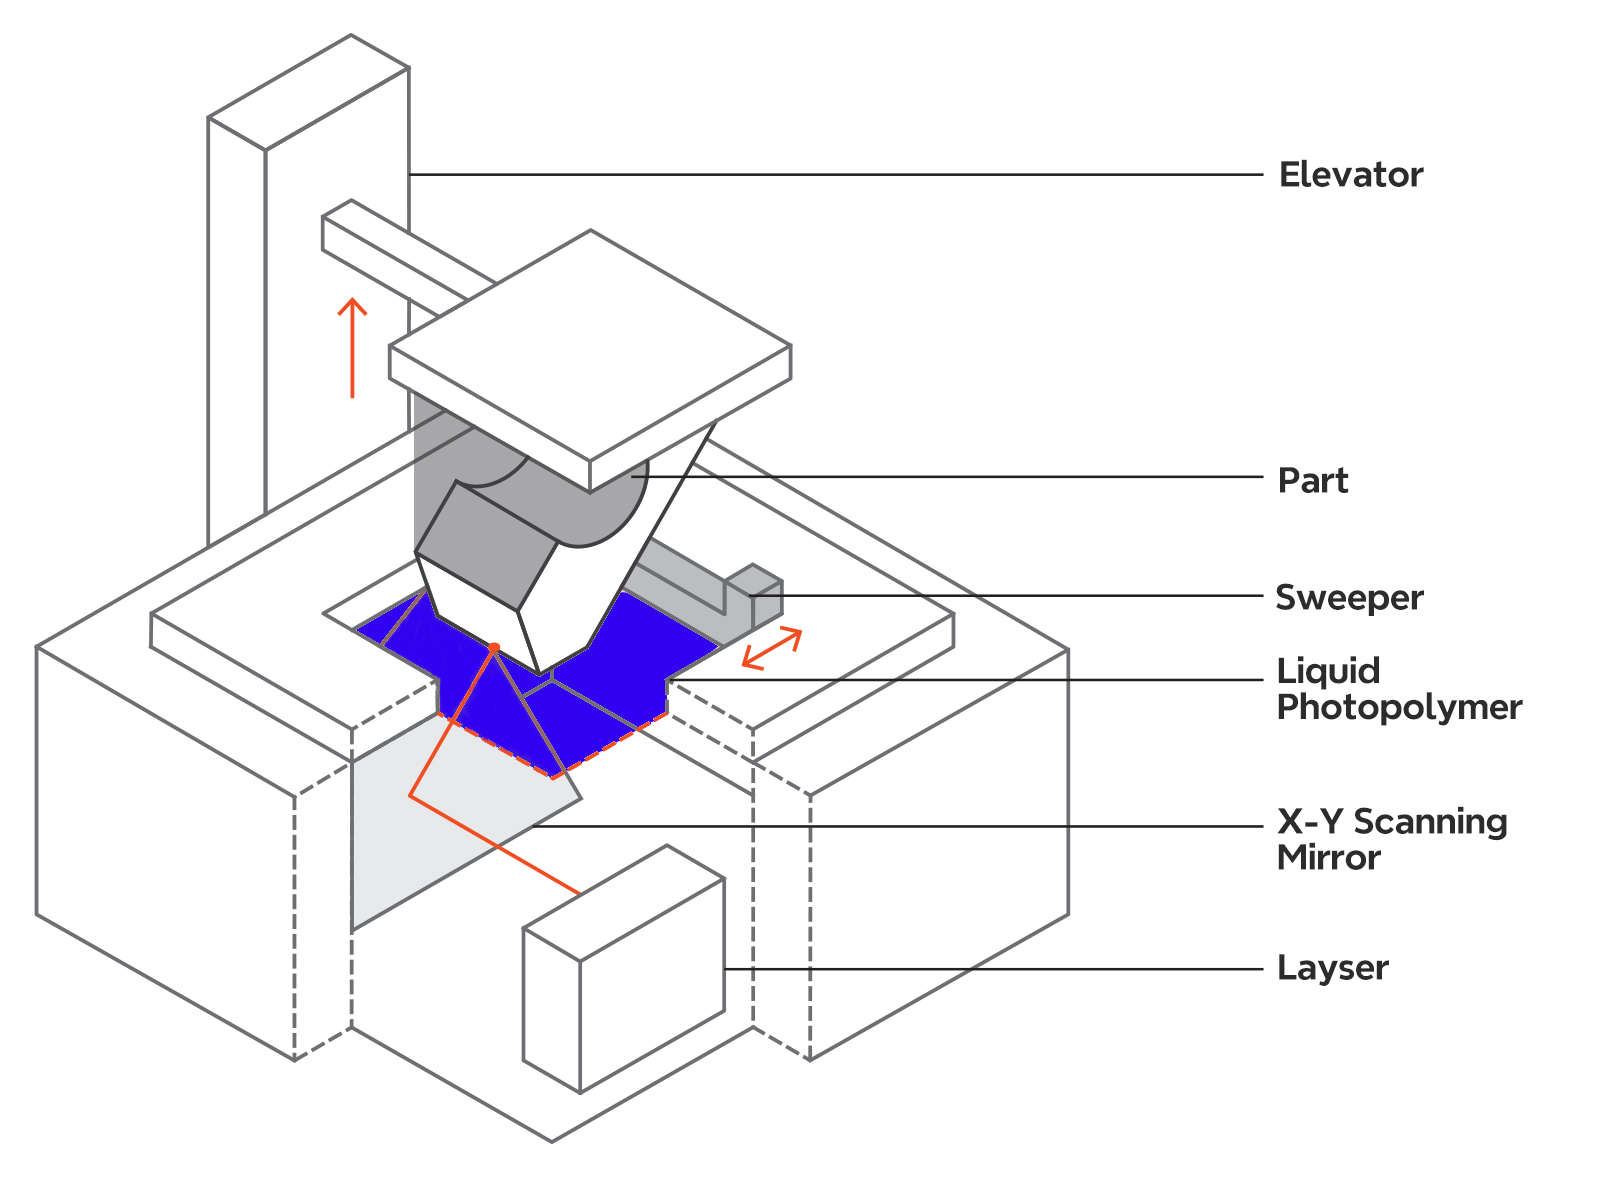 Structure of Stereolithography